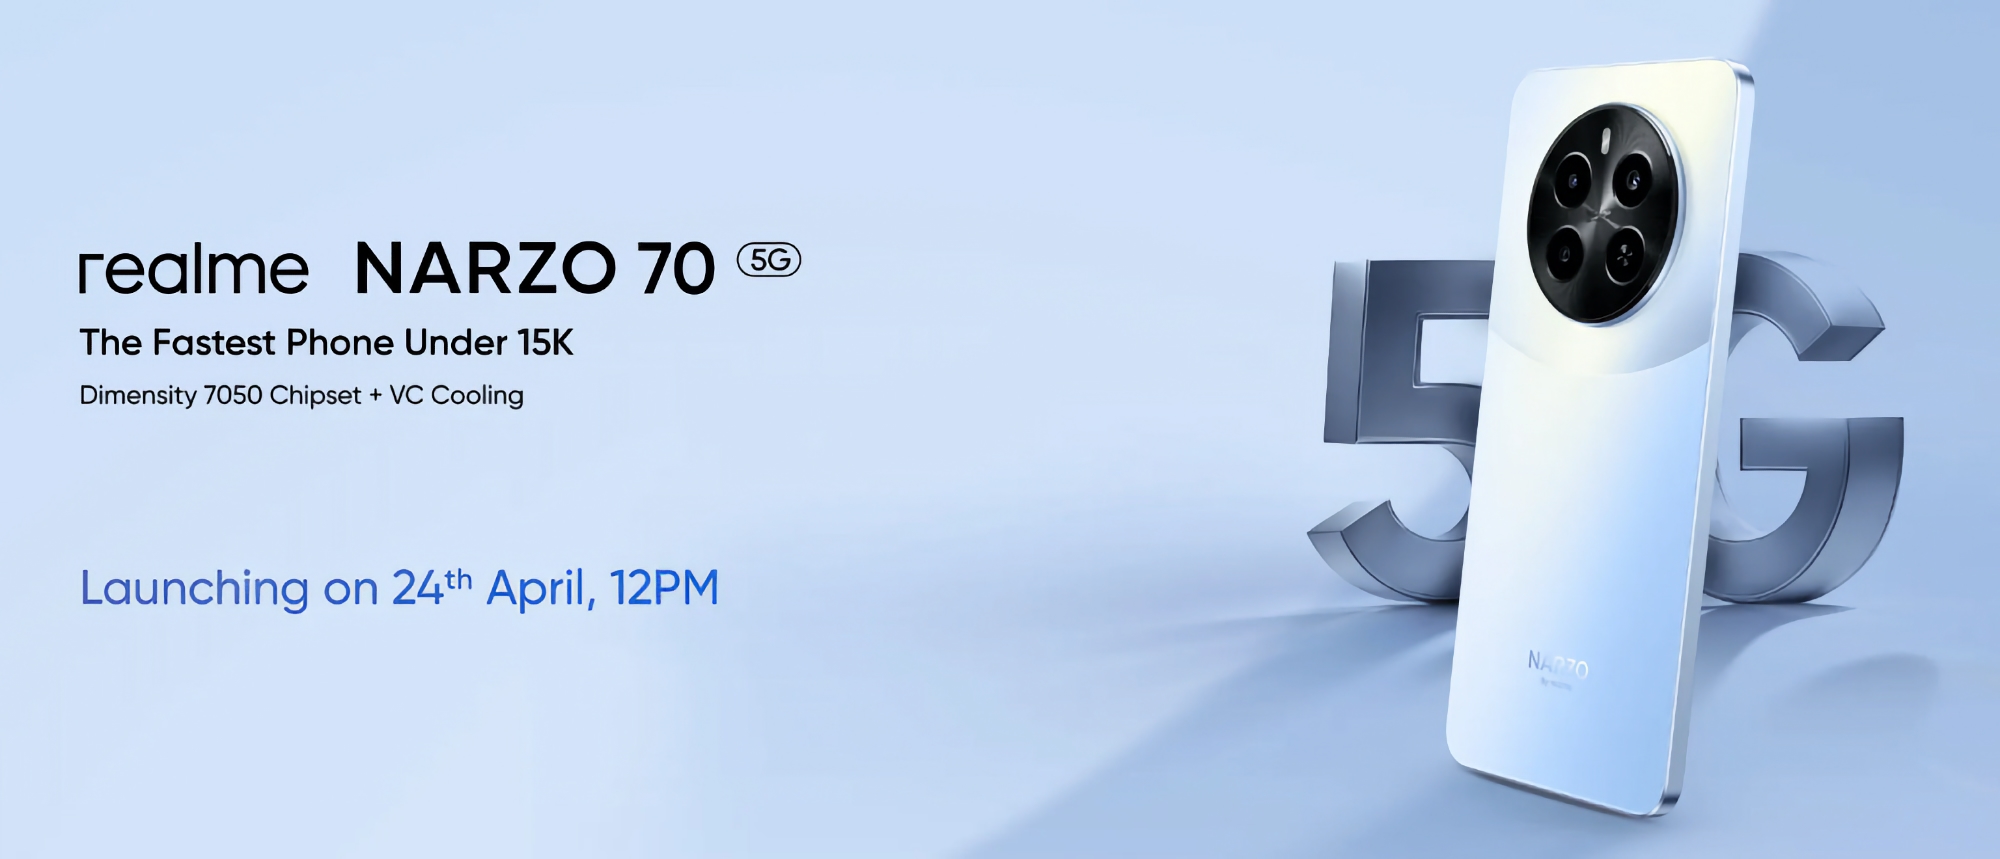 It's official: realme Narzo 70 5G with MediaTek Dimensity 7050 chip will debut on April 24